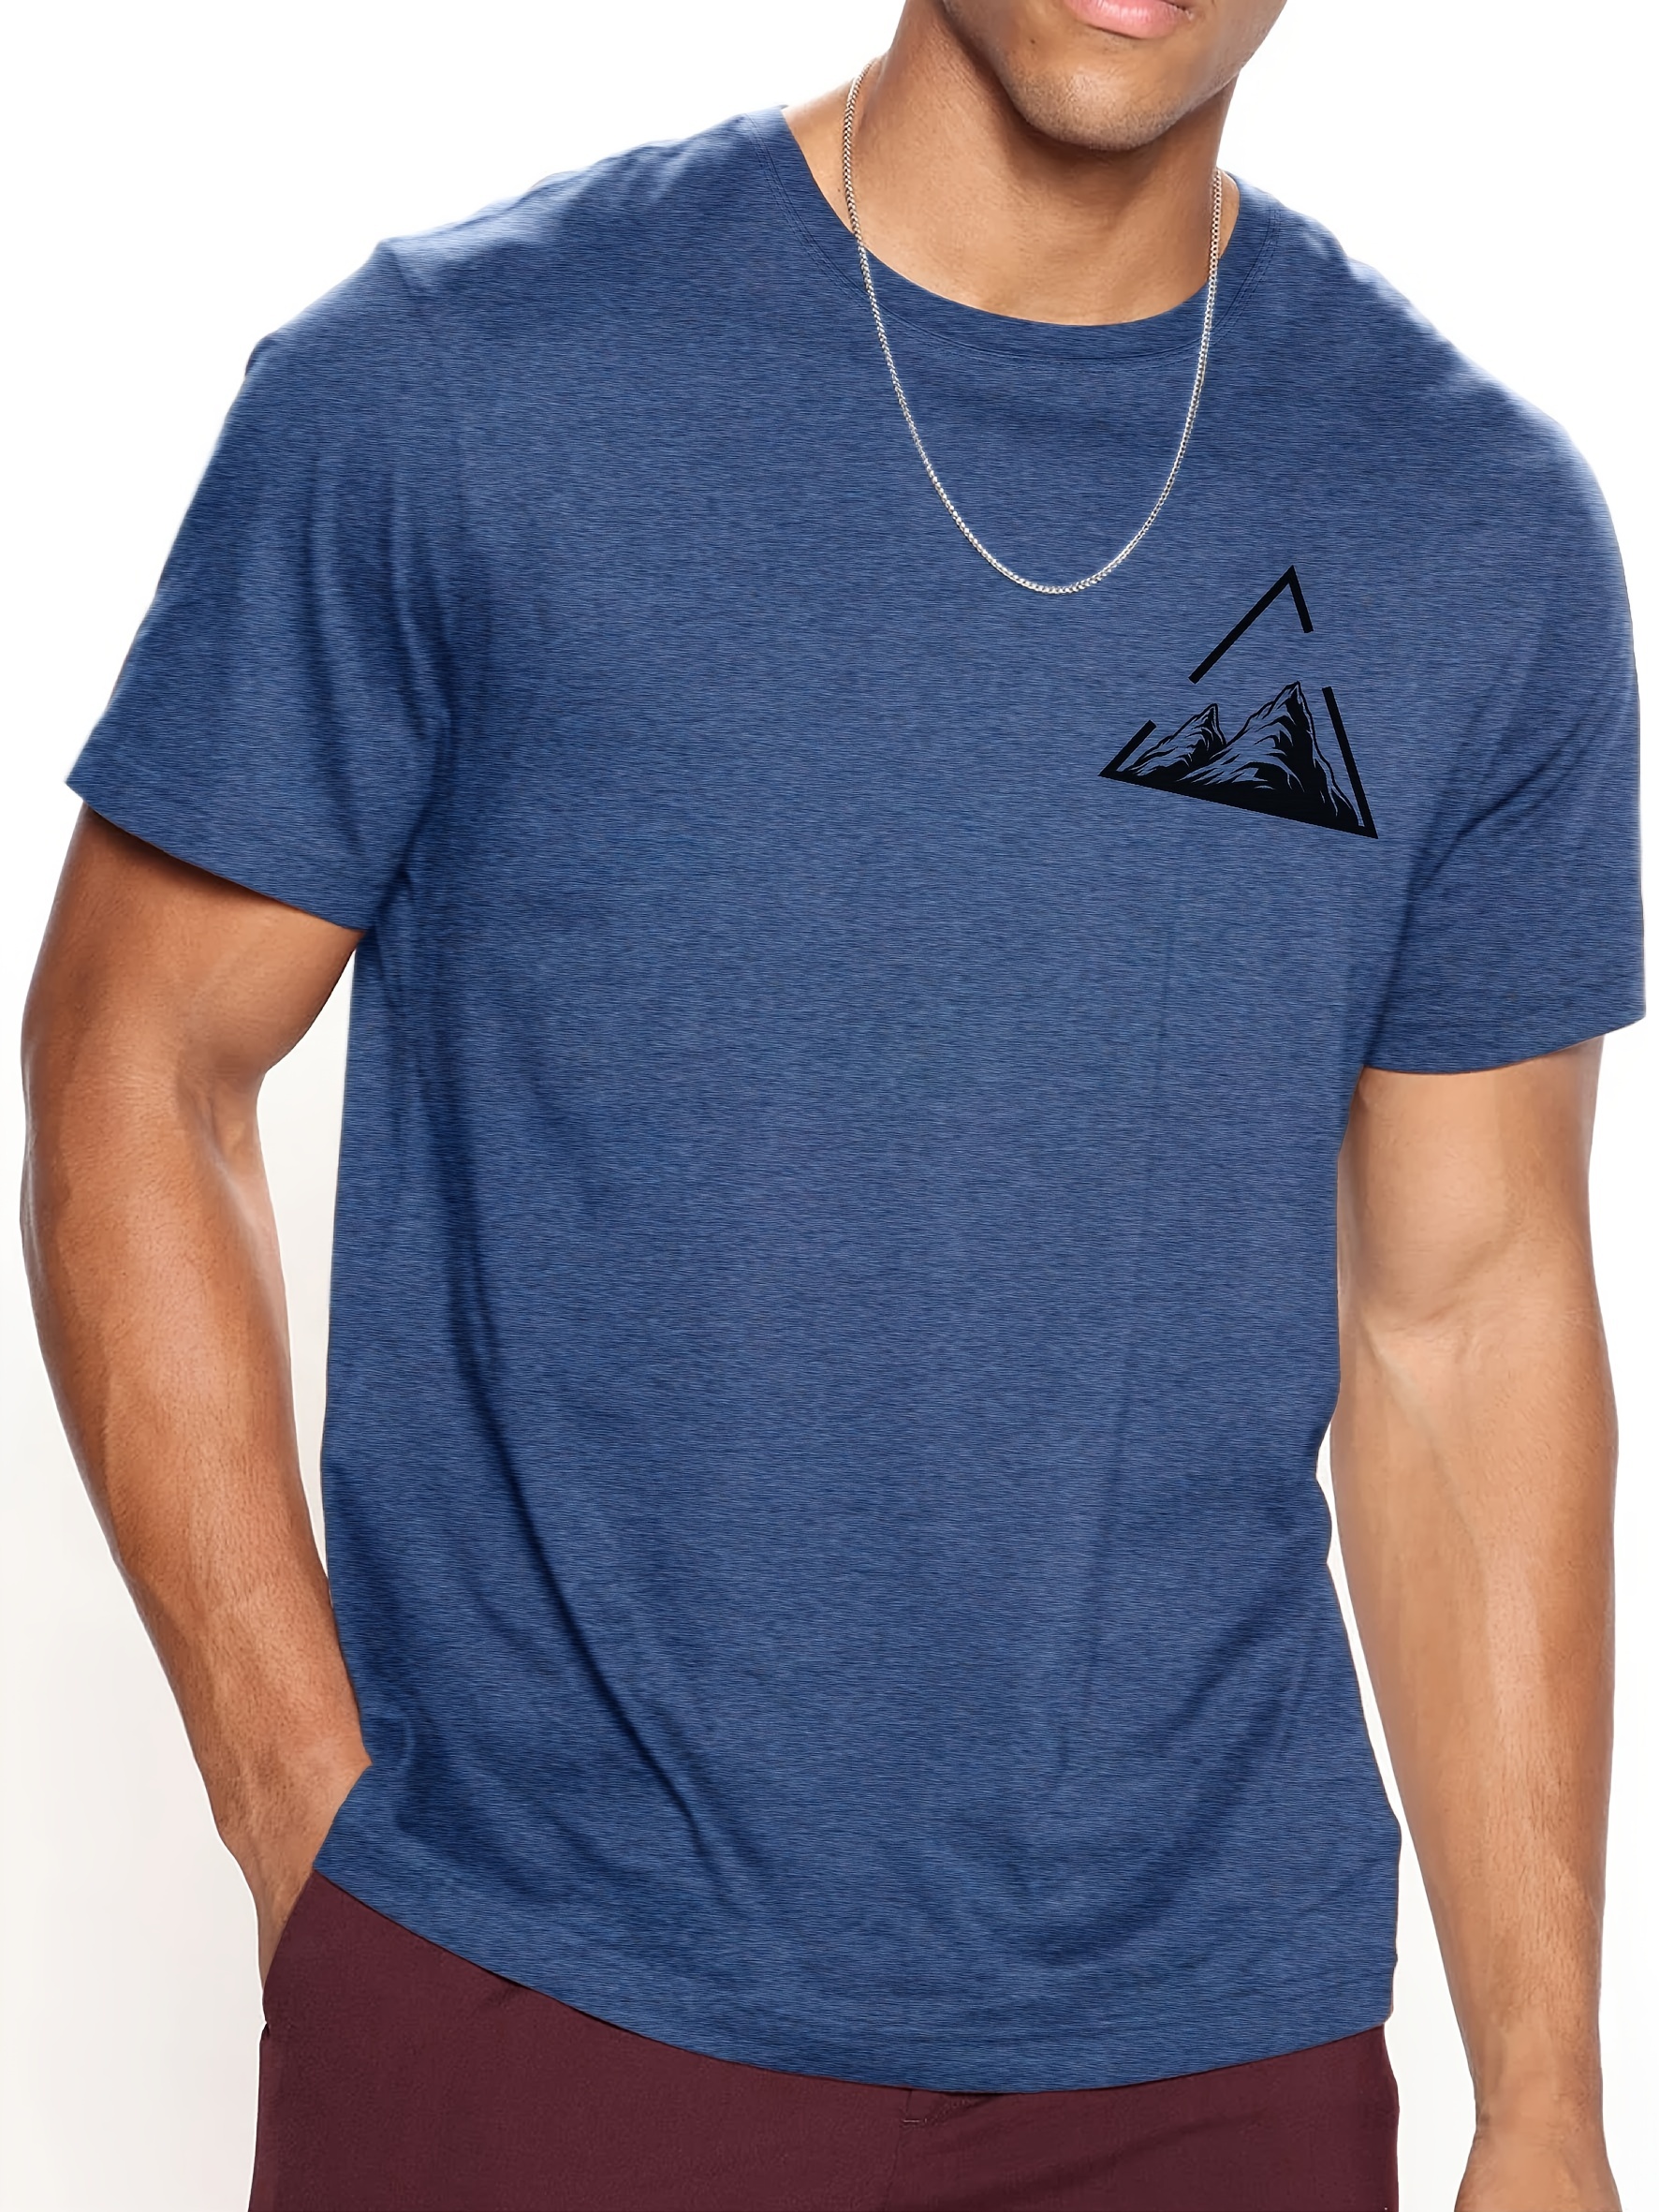 Men's Tops & T-shirts Outlet, Men's Clearance Tops